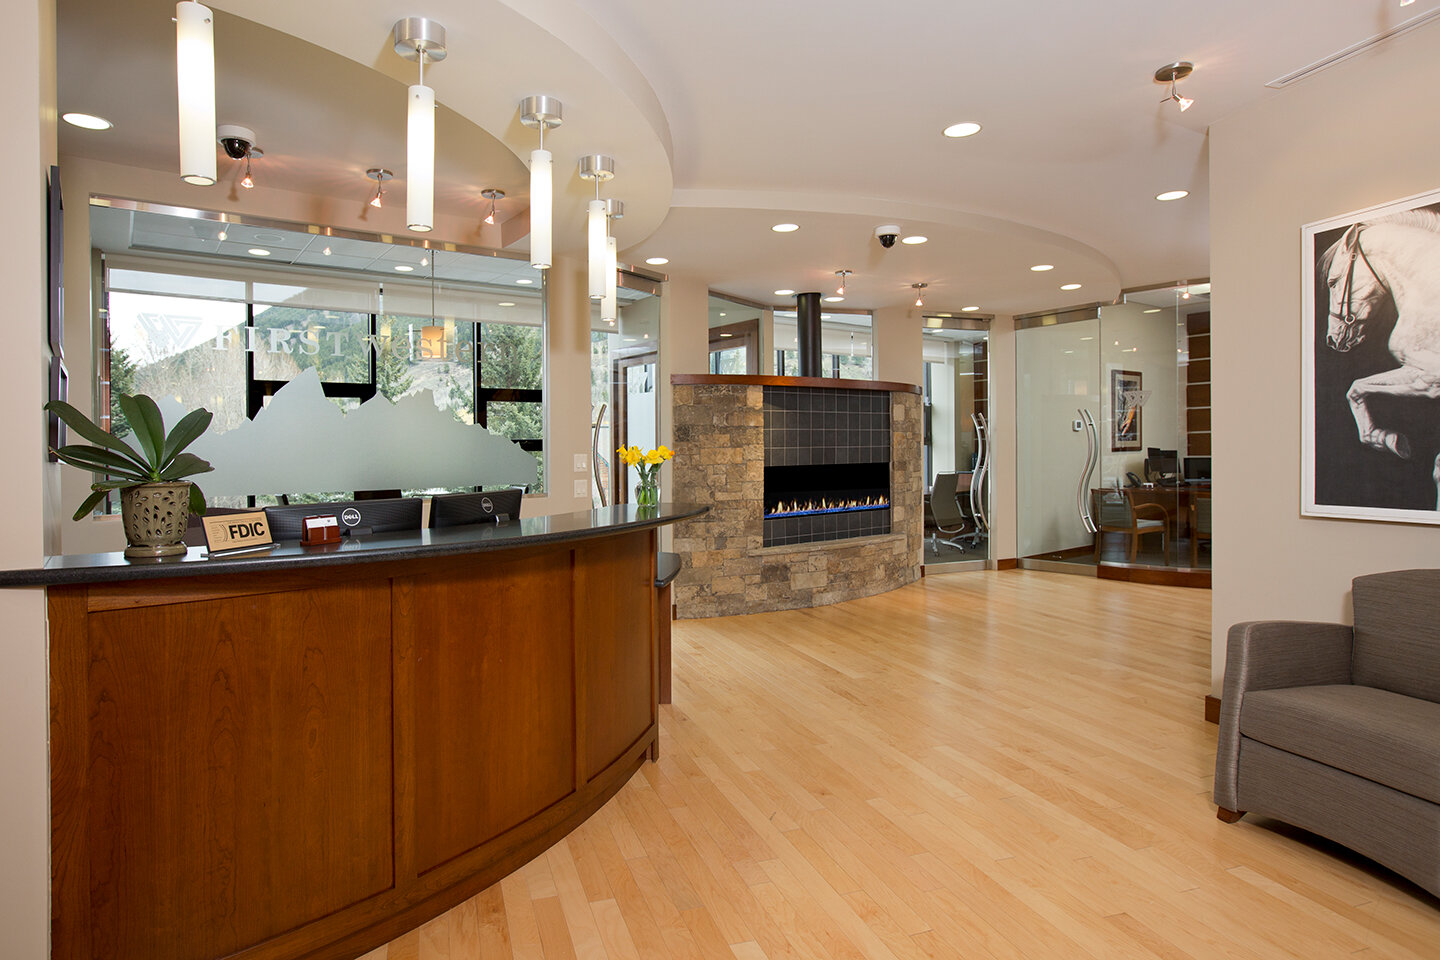 Bank lobby with electric fireplace